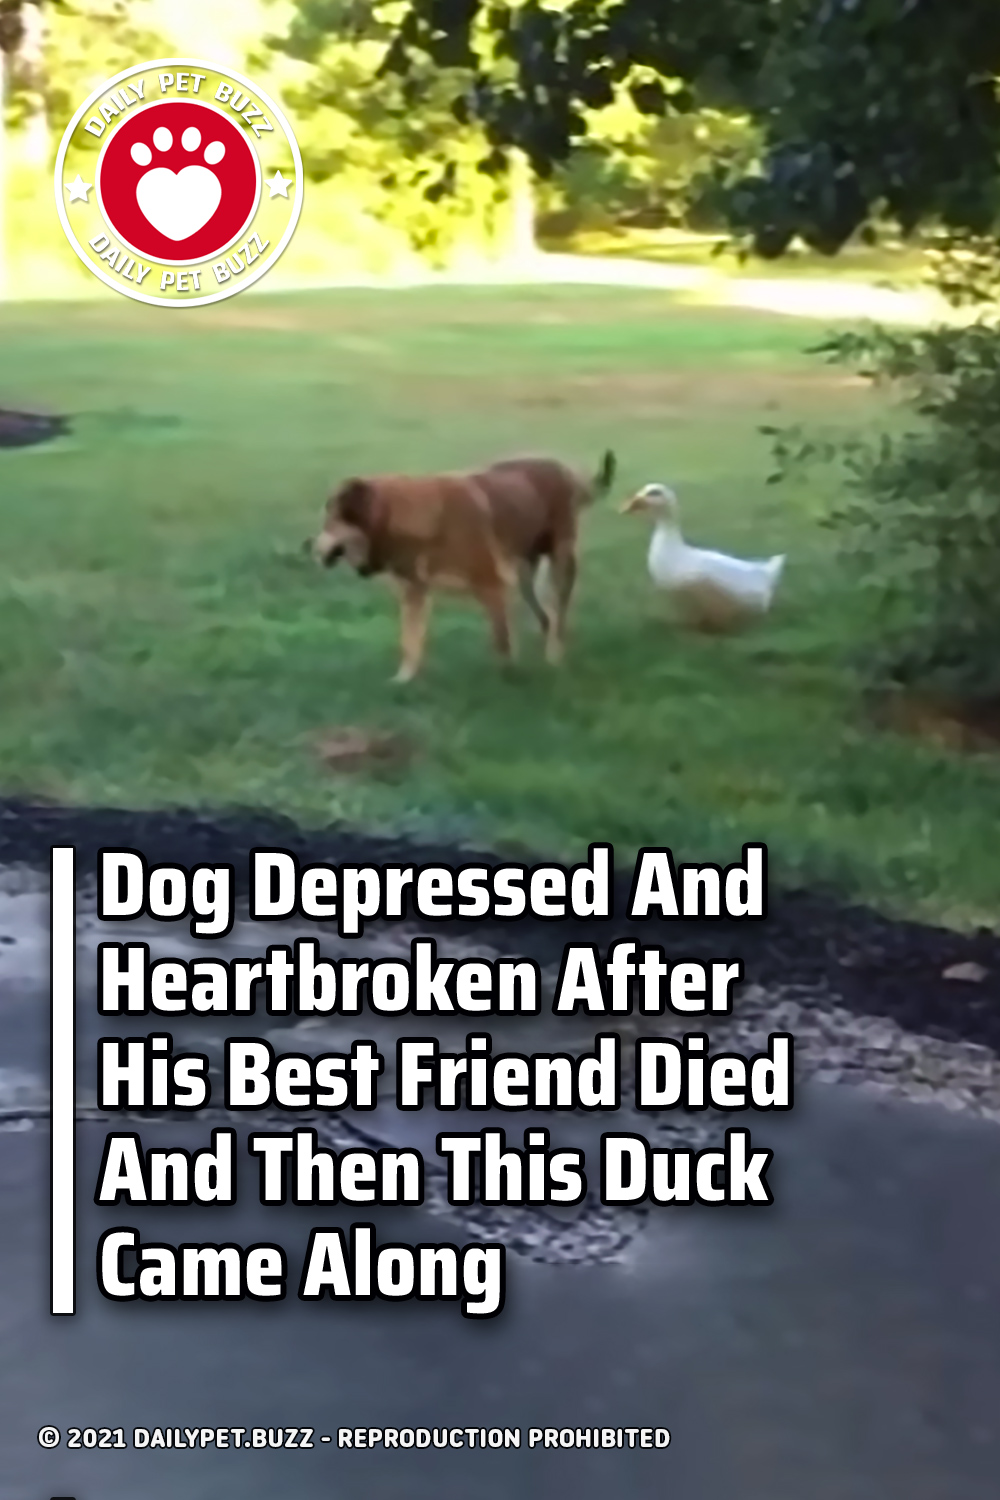 Dog Depressed And Heartbroken After His Best Friend Died And Then This Duck Came Along